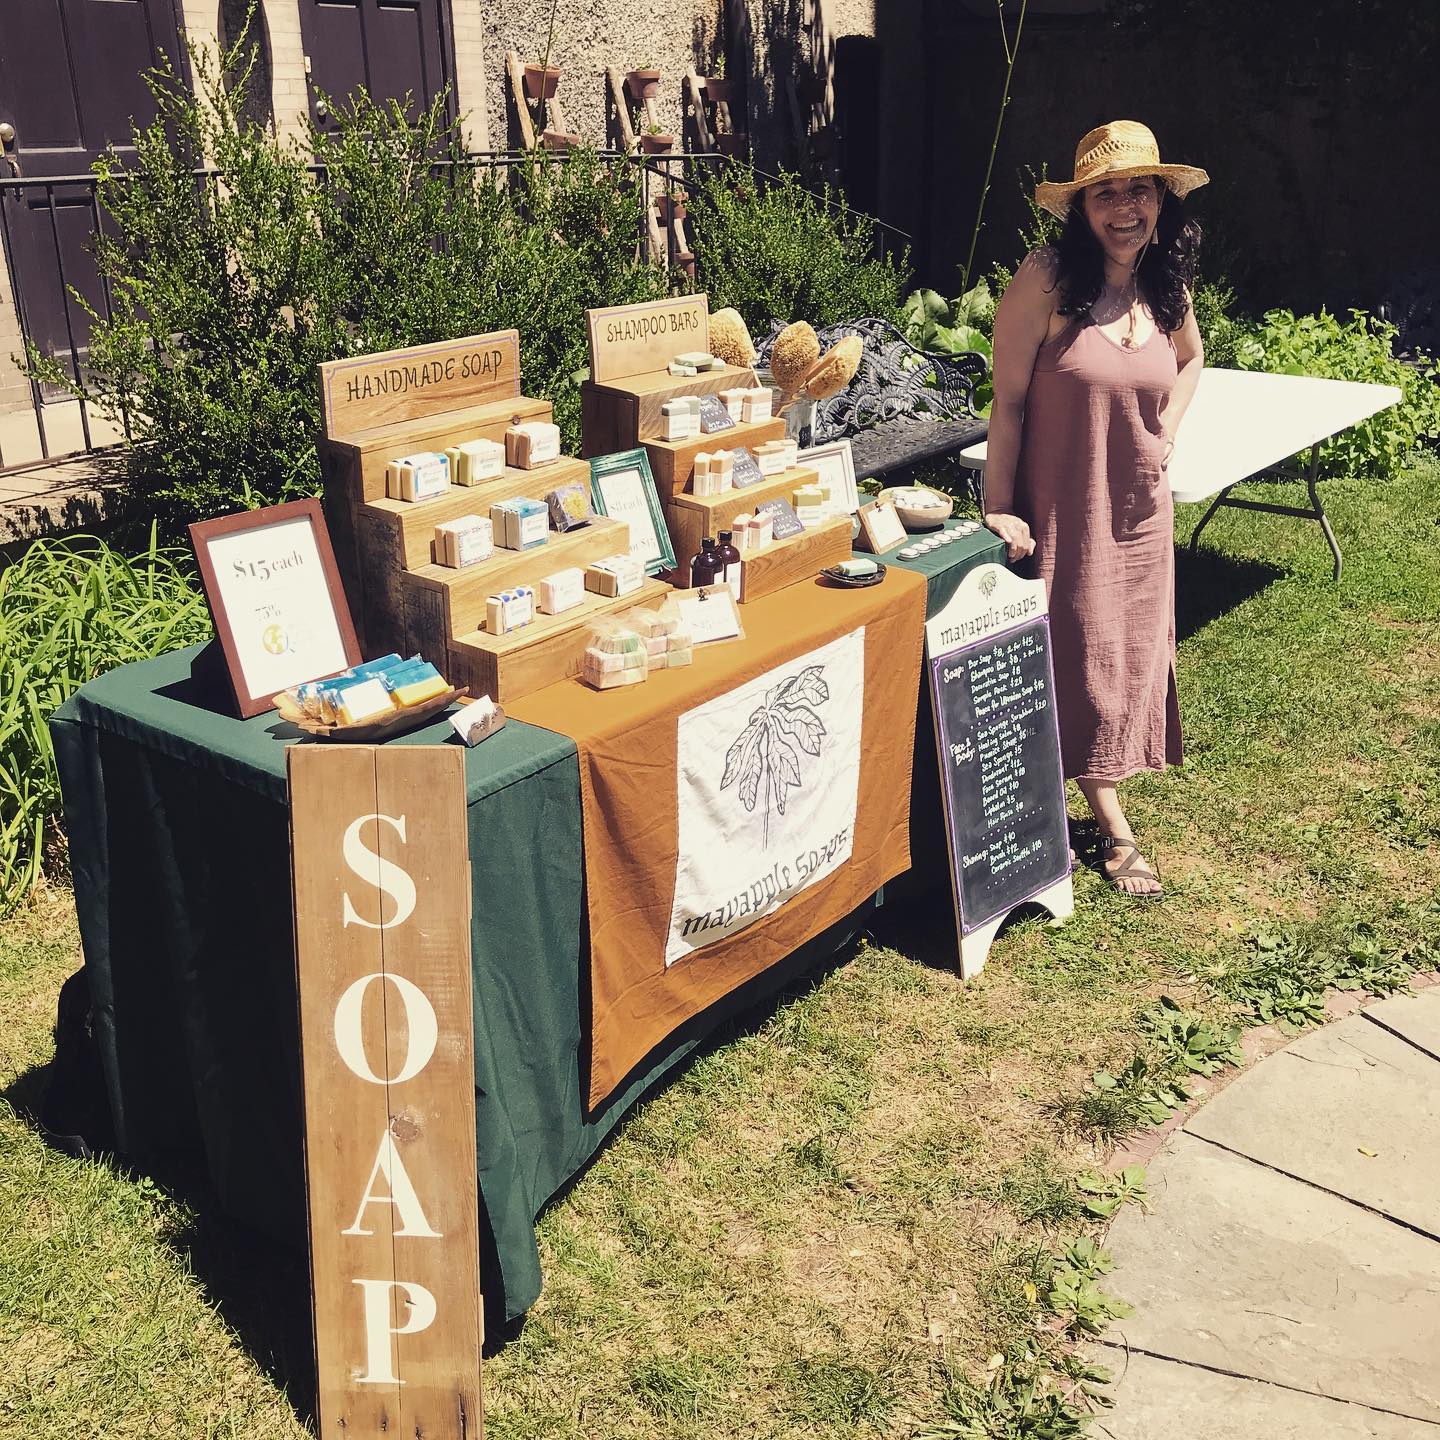 I’m here at the Heurich House Mini Market until 5pm. Come say hi, shop local makers, and relax in the beer garden.

Sat. August 13th, 1-5 PM
1307 New Hampshire Ave NW
Outdoors in the Bier Garten

#heurichminimarket #dupontcircledc #madeindc #dcmakers #202creates #bythingsdc #shoplocaldc #dupontcirclemarket #washingtondc #dccraftbeer #senatebeer #dcmade #thingstodoindc #beergarden #dcbeergarden #dcmarkets #1921biergarten #localdc #thinklocalfirstdc #shopsmalldc